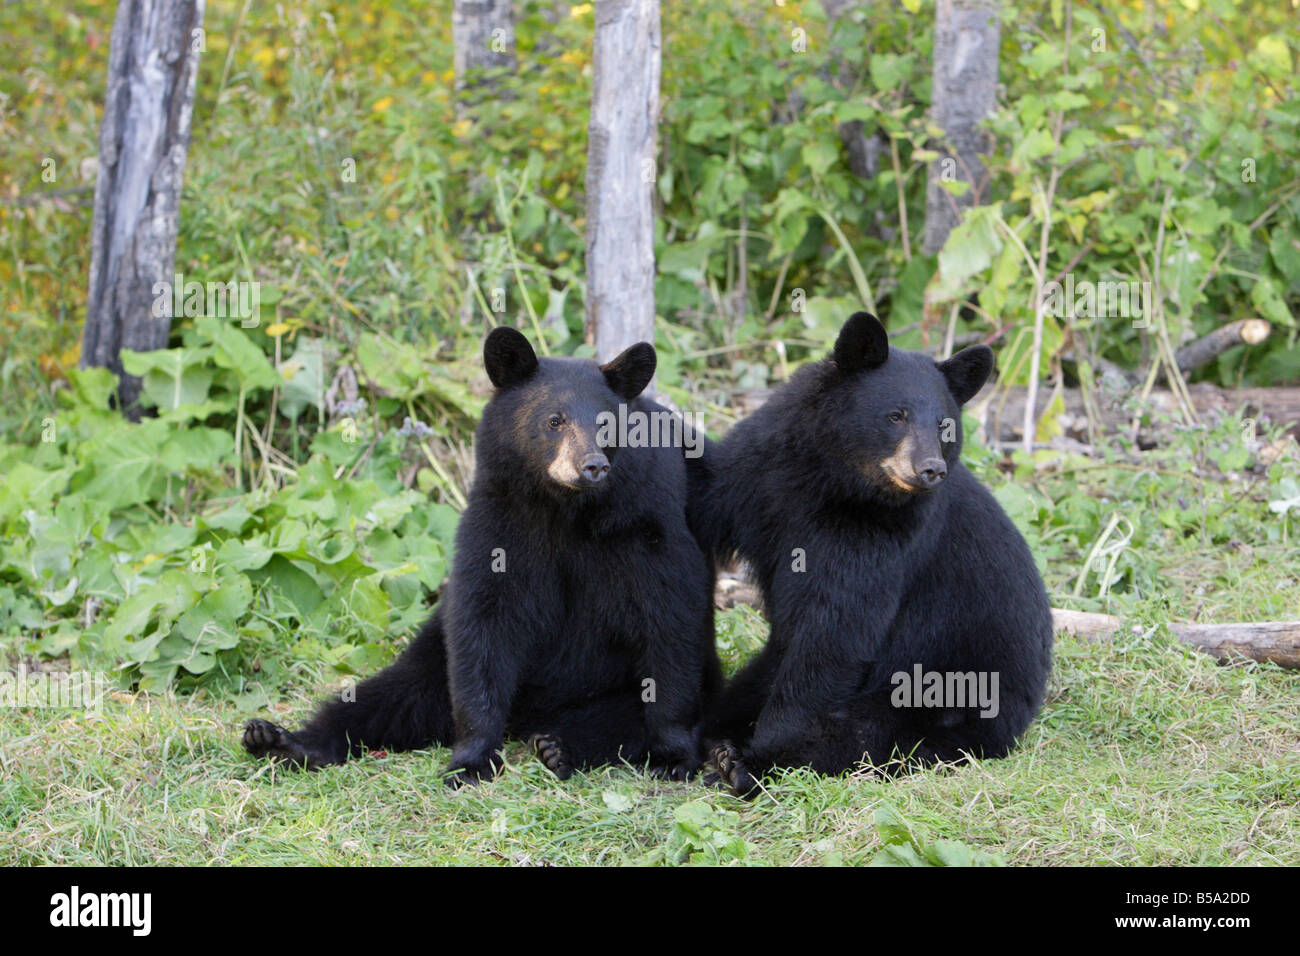 Black Bear Ursus americanus pair of cubs sitting on the ground with their arms round each other with eye contact Stock Photo